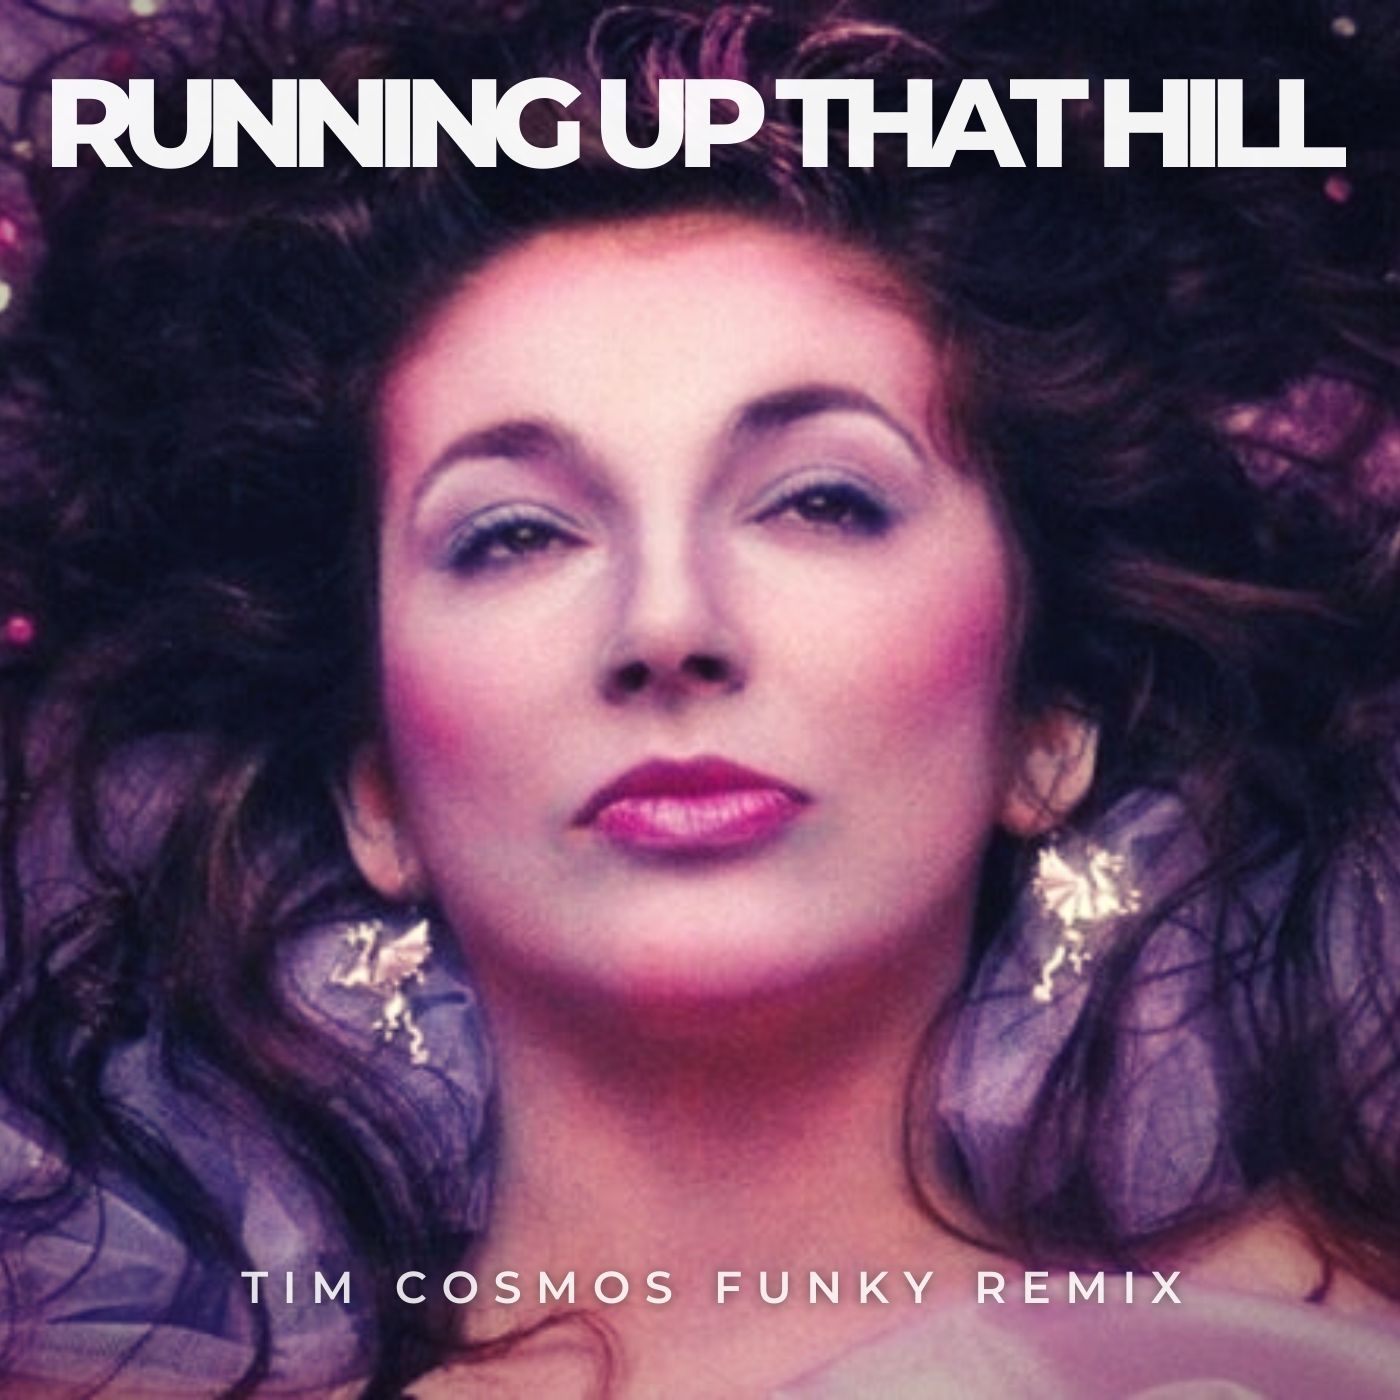 Sii mai Kate Bush - Running Up That Hill (Tim Cosmos Funky Remix) [HYPEDDIT #01 NUDISCO CHART]